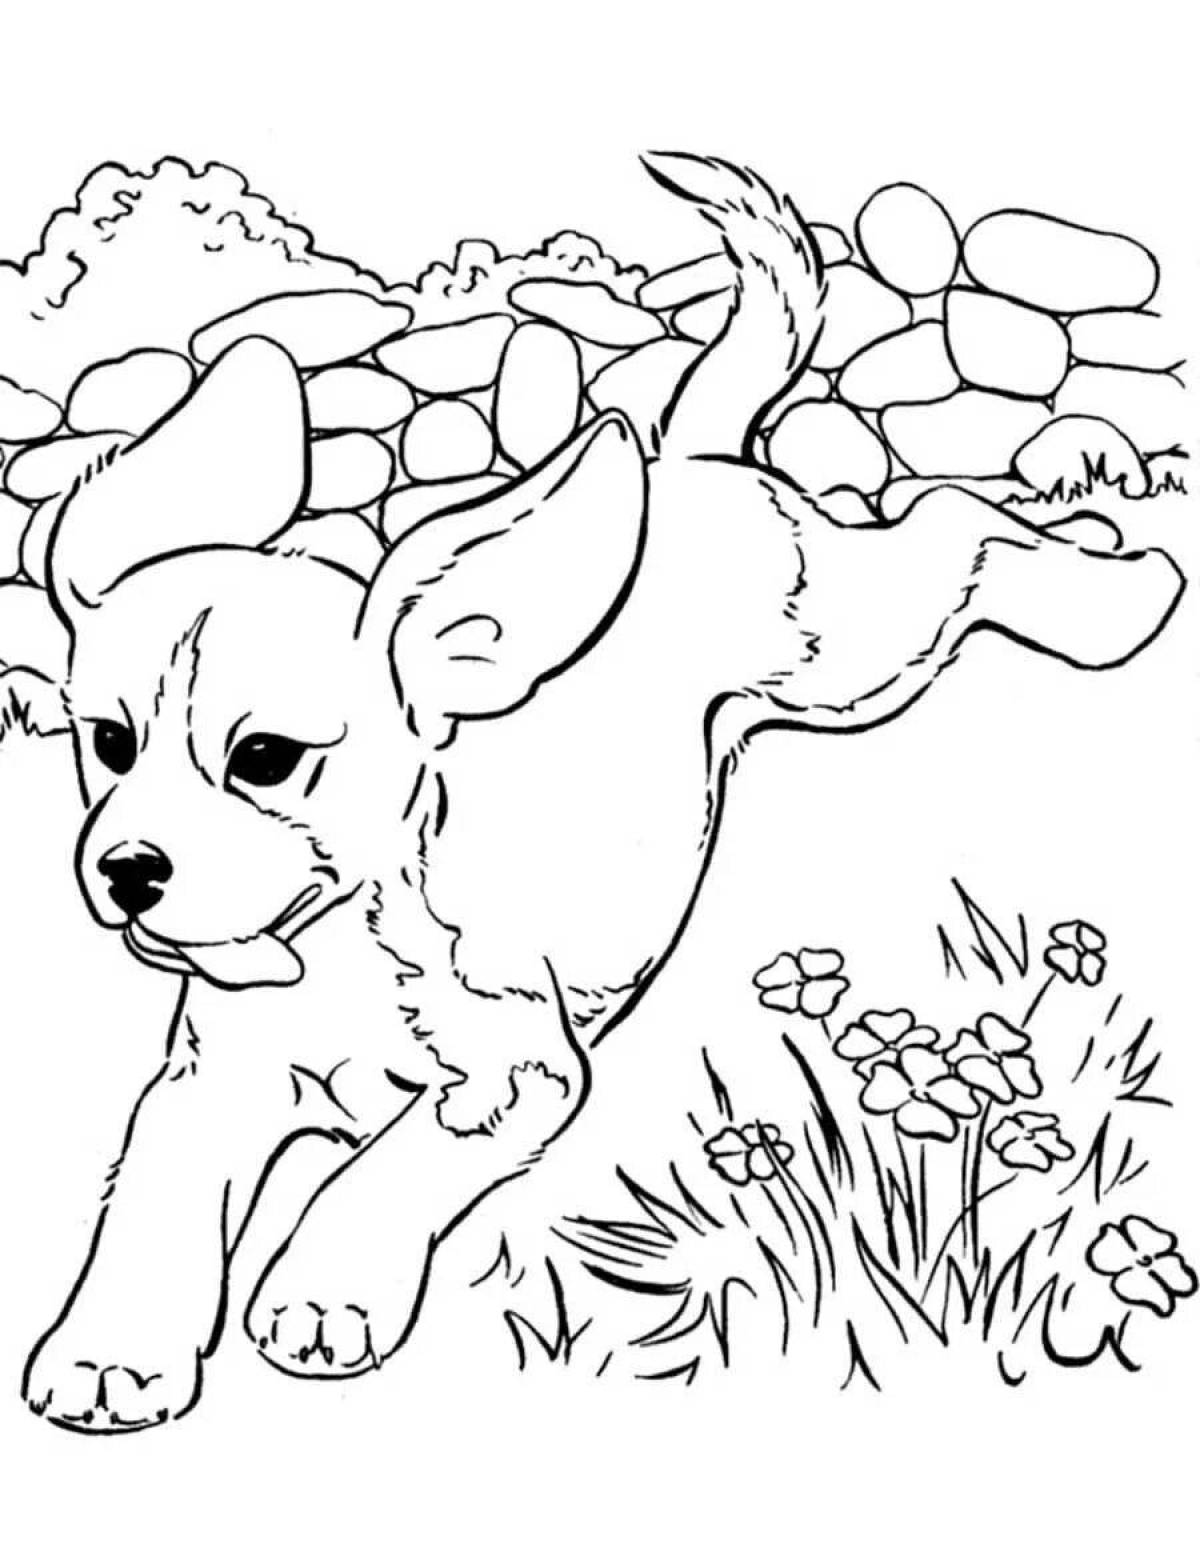 Funny animal coloring for children 10-12 years old